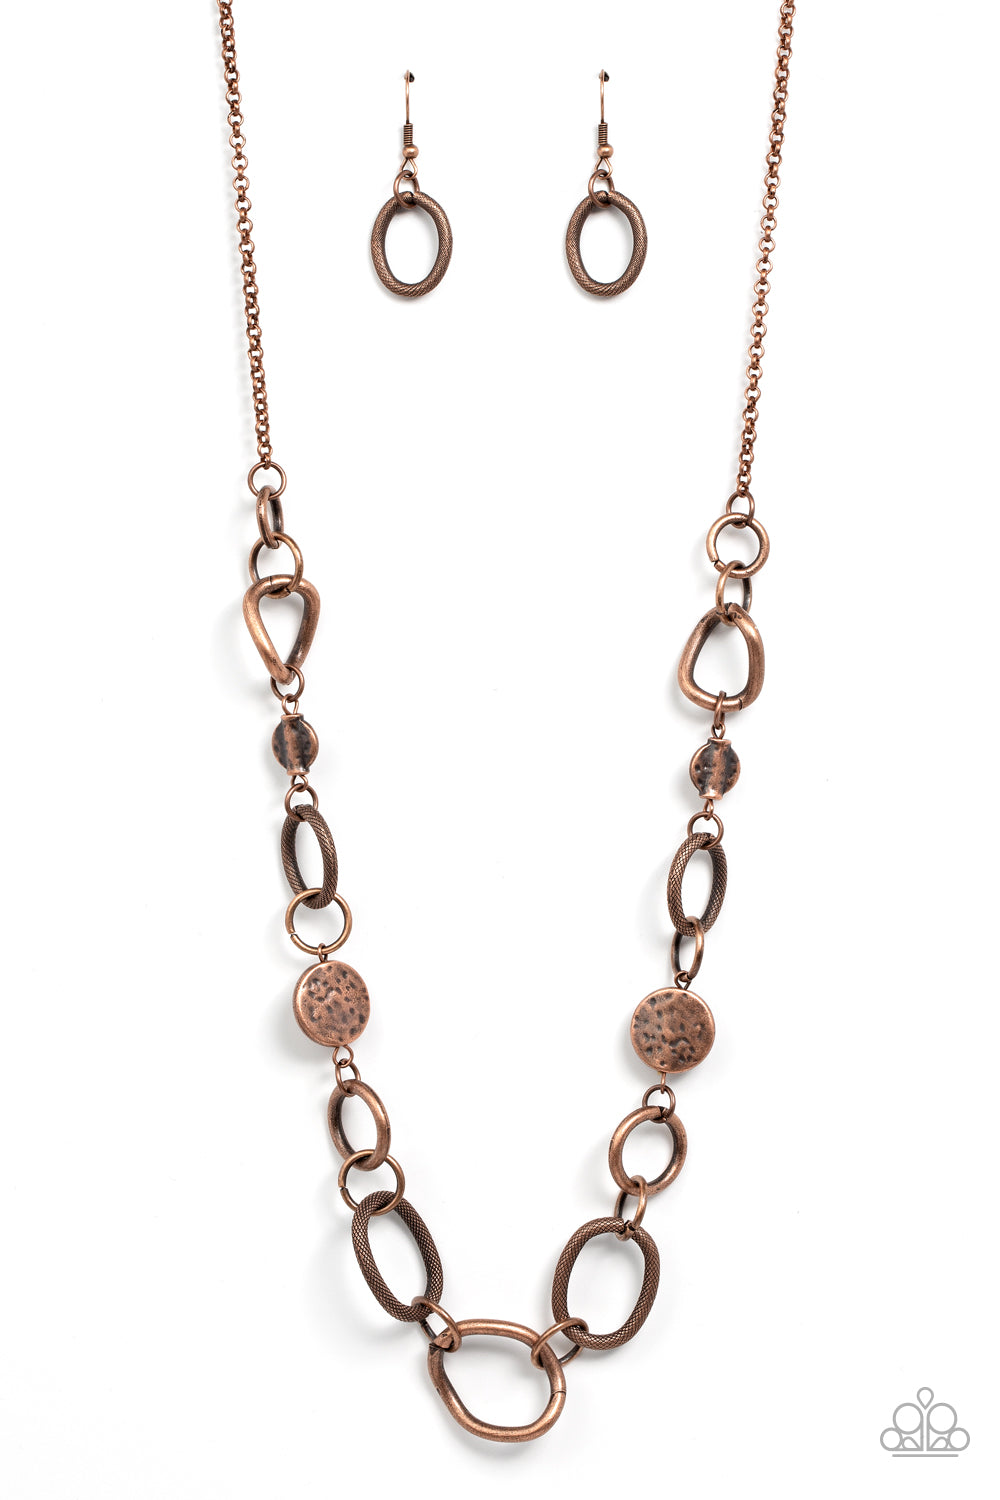 Industrial Intentions - copper - Paparazzi necklace